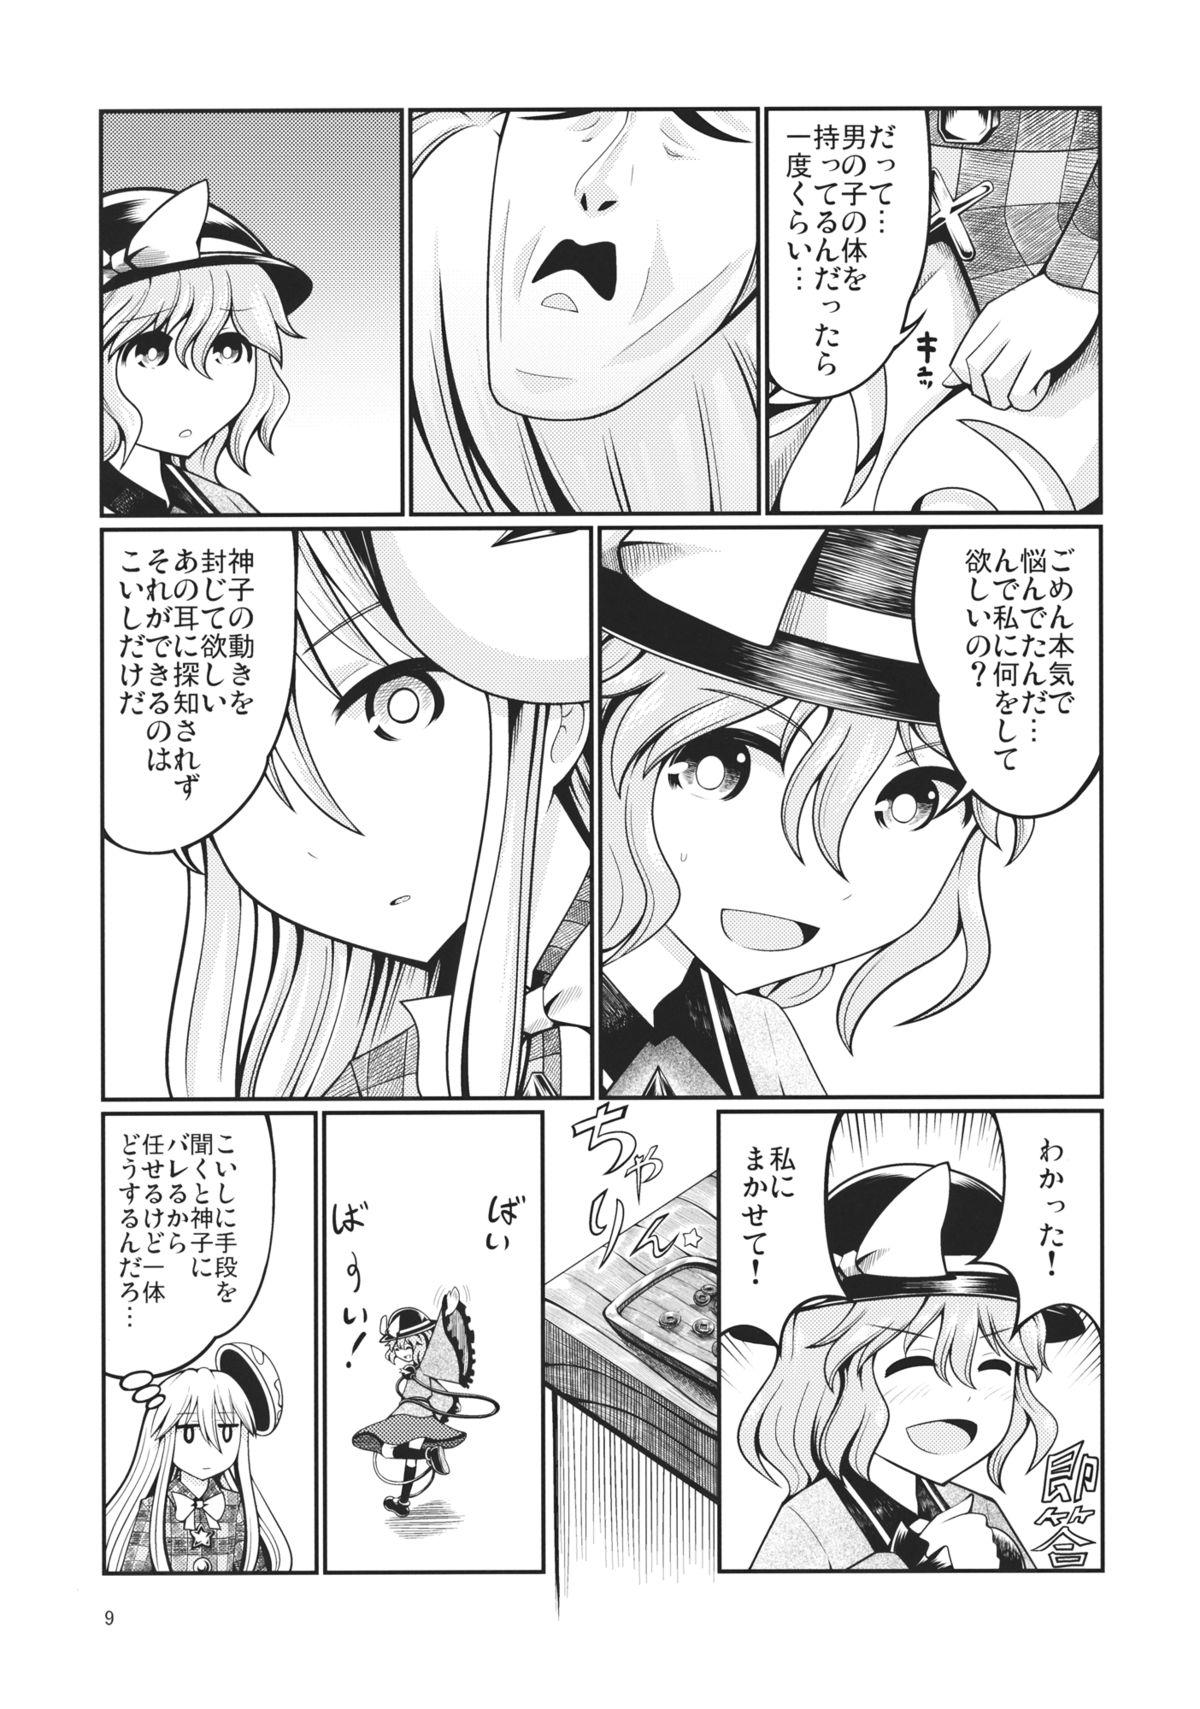 Gape Reverse Sexuality 3 - Touhou project Full Movie - Page 8